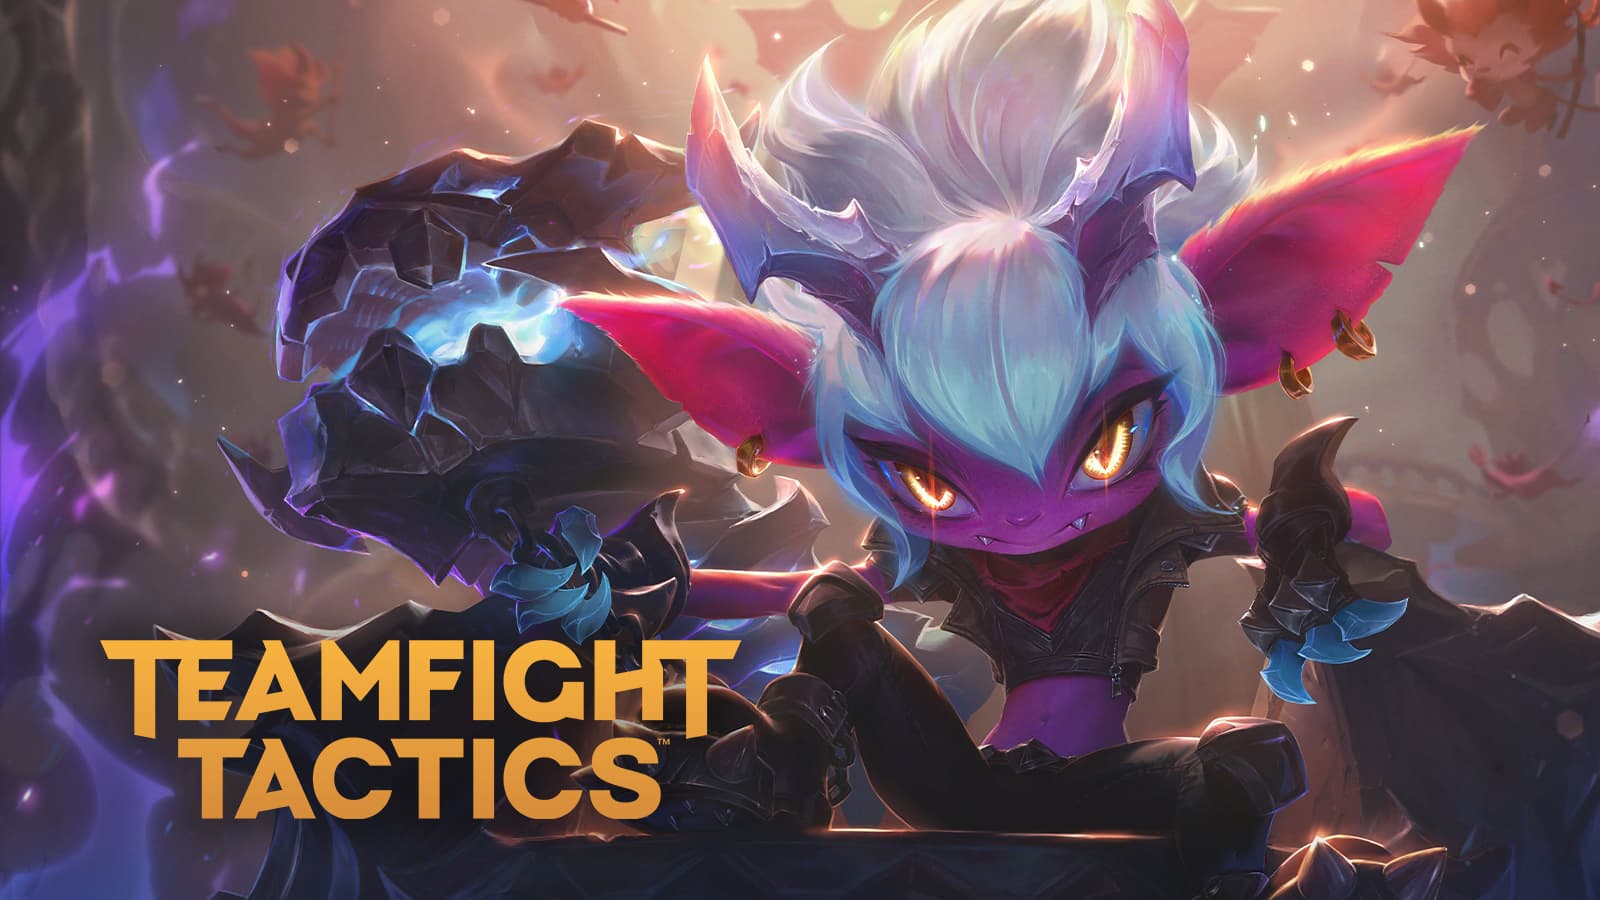 End of TFT set 5.5. Do you know what the top TFT tier comps are?